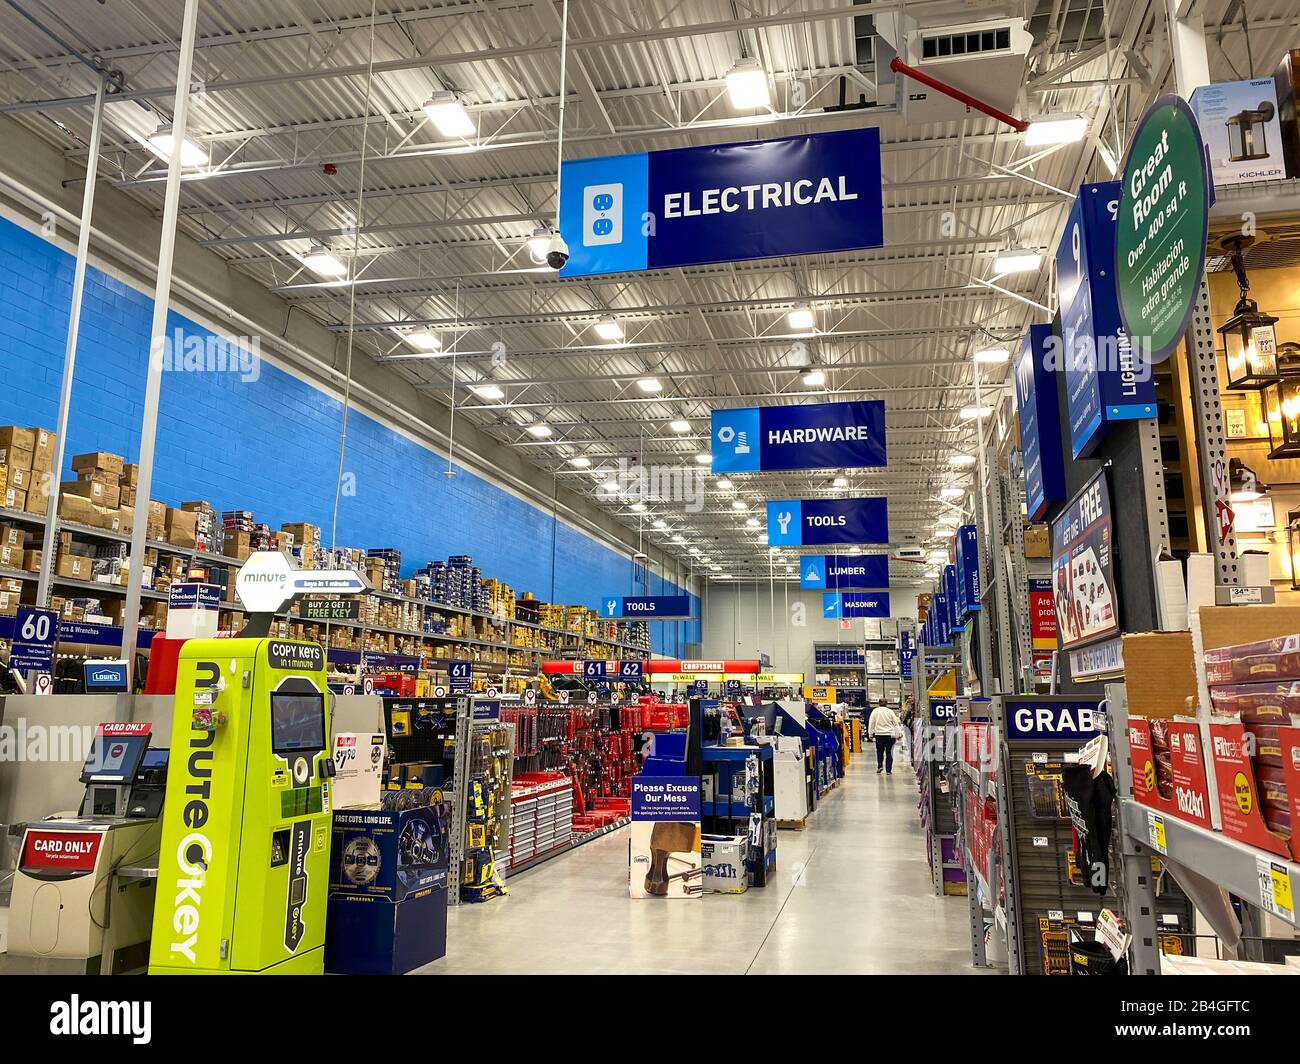 Orlando,FL/USA-1/20/20: The signs hanging from the ceiling at Lowes home improvement store that designate what departments are in the aisle while peop Stock Photo